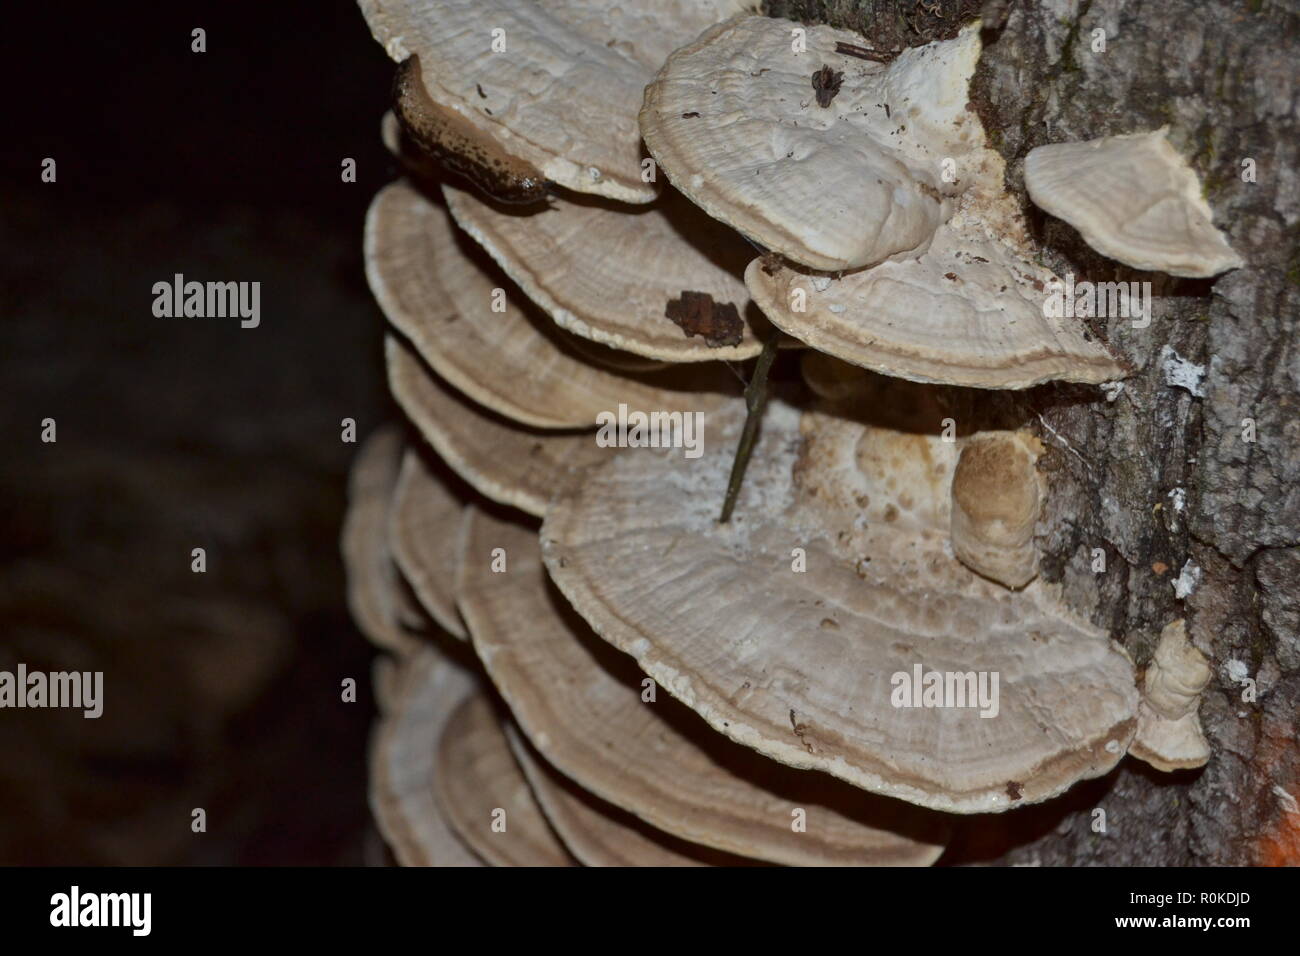 white-rot fungus Trametes pubescens growing on a rotting stump in the woods. Stock Photo